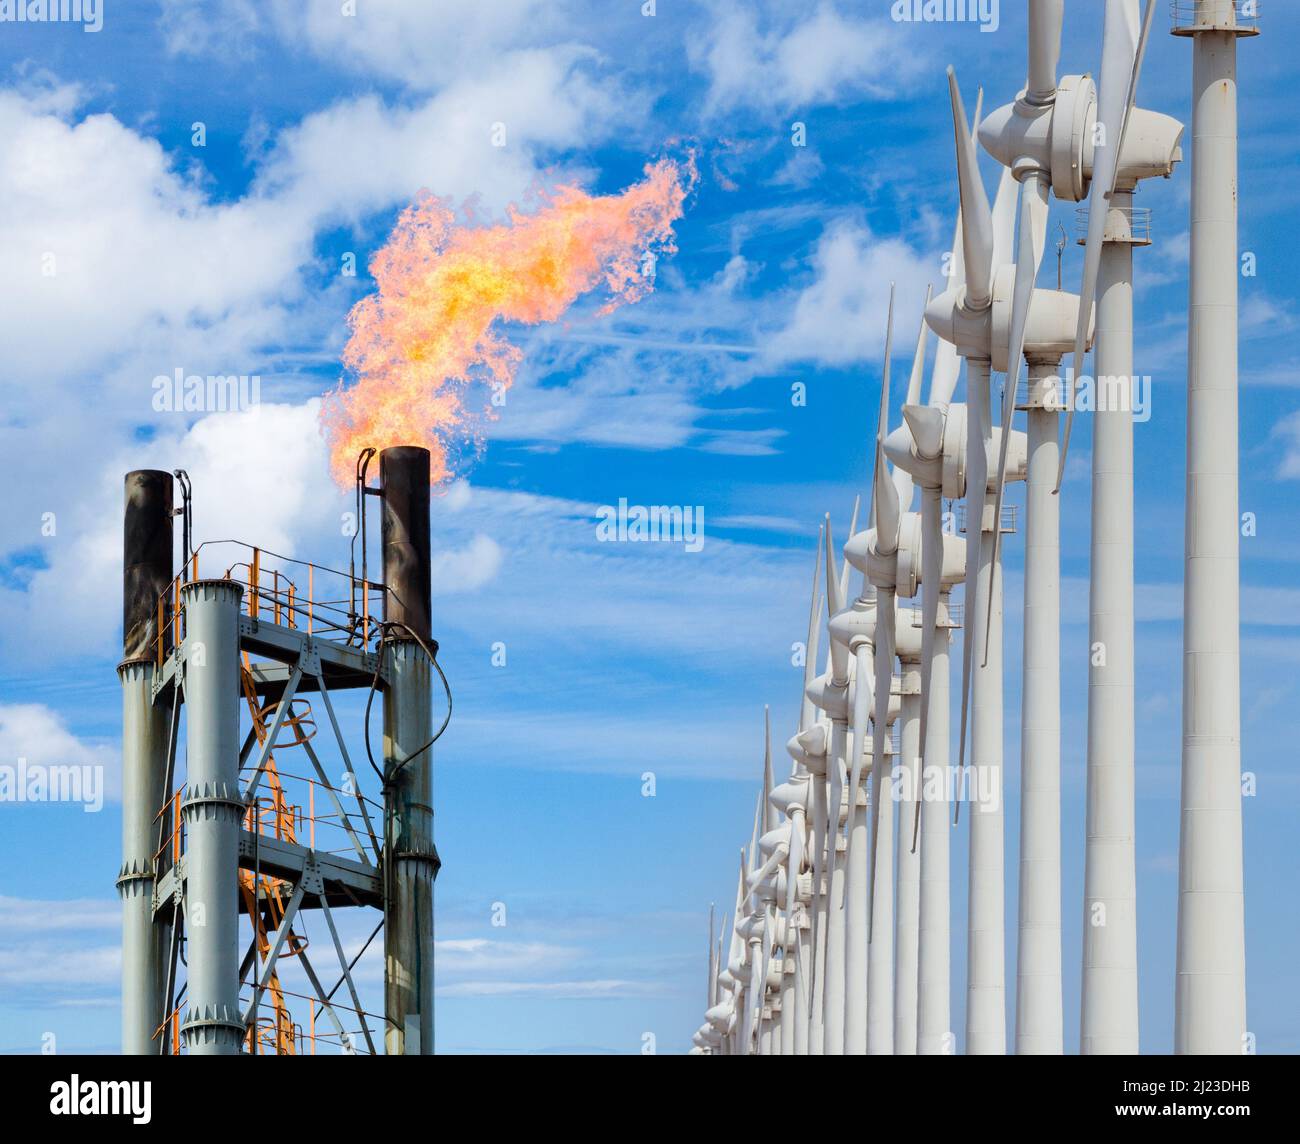 Refinery/petro chemical gas flare stack/chimney. Rising energy prices, cost of living crisis, global warming, green, renewables... concept Stock Photo